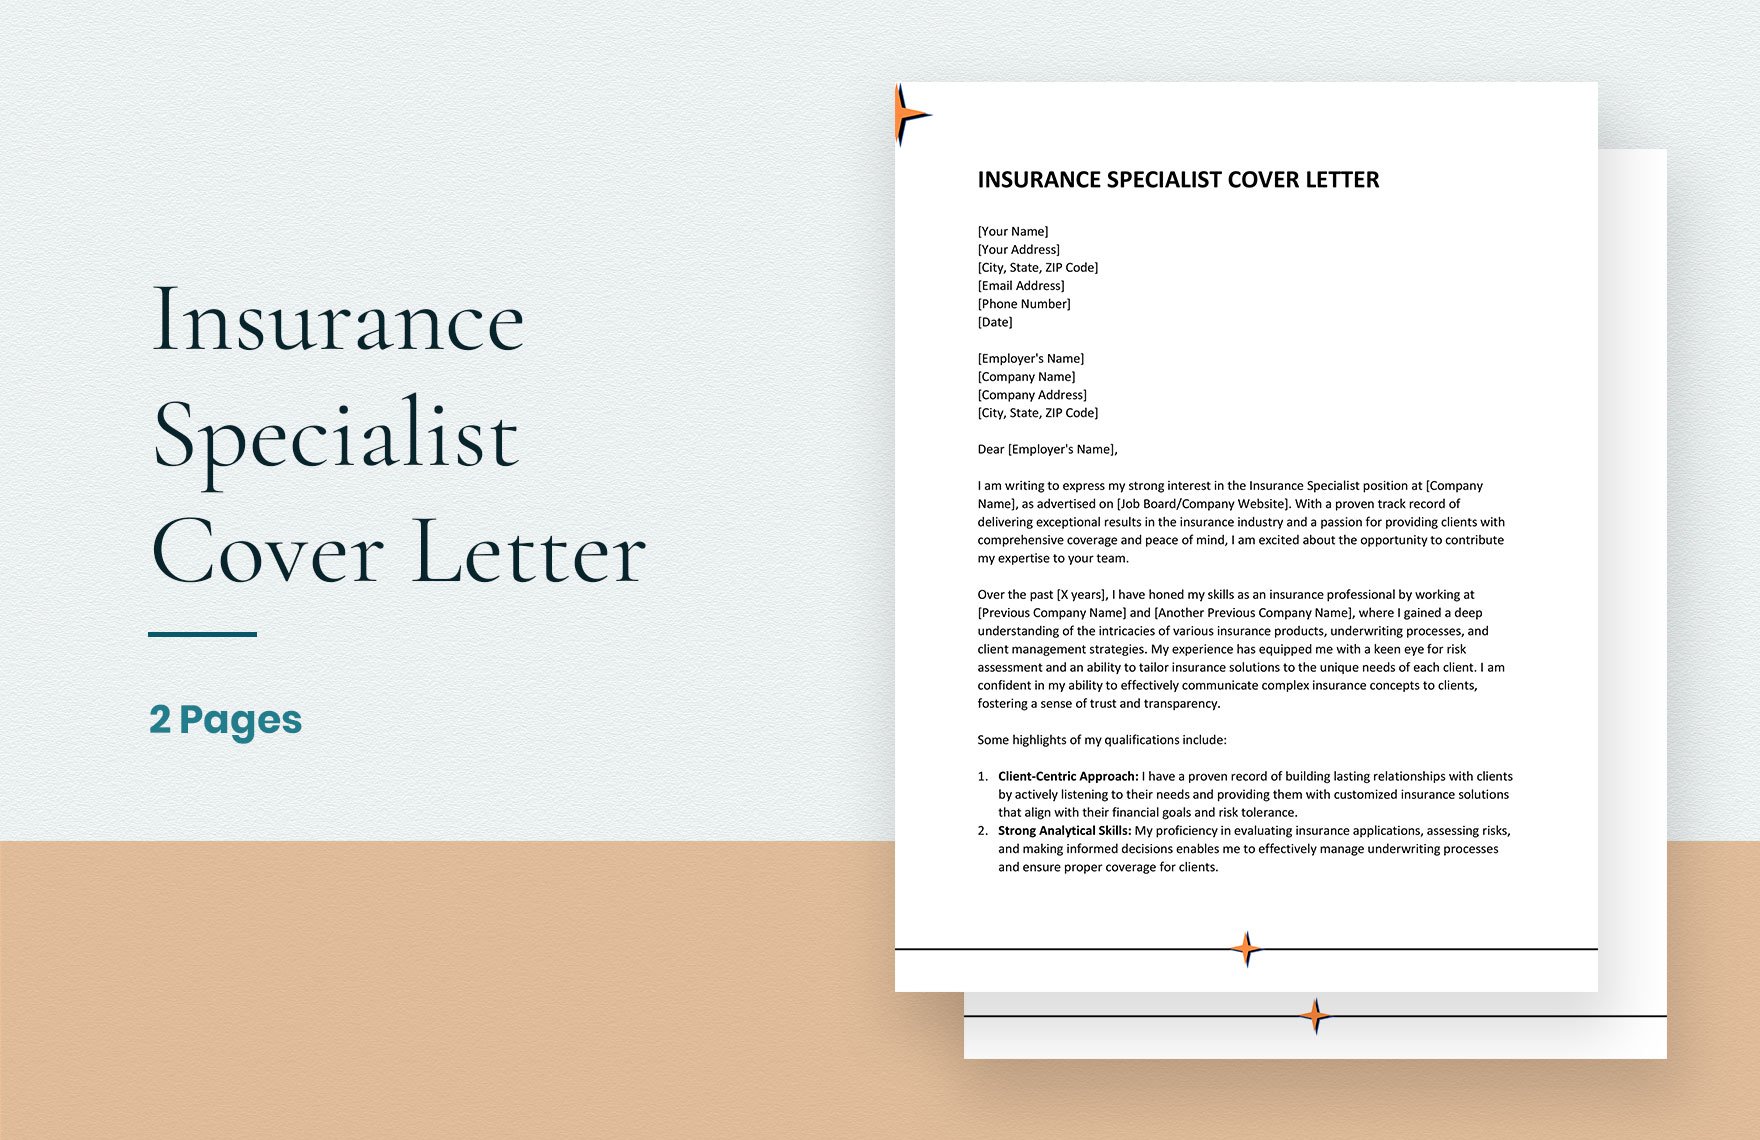 Insurance Specialist Cover Letter